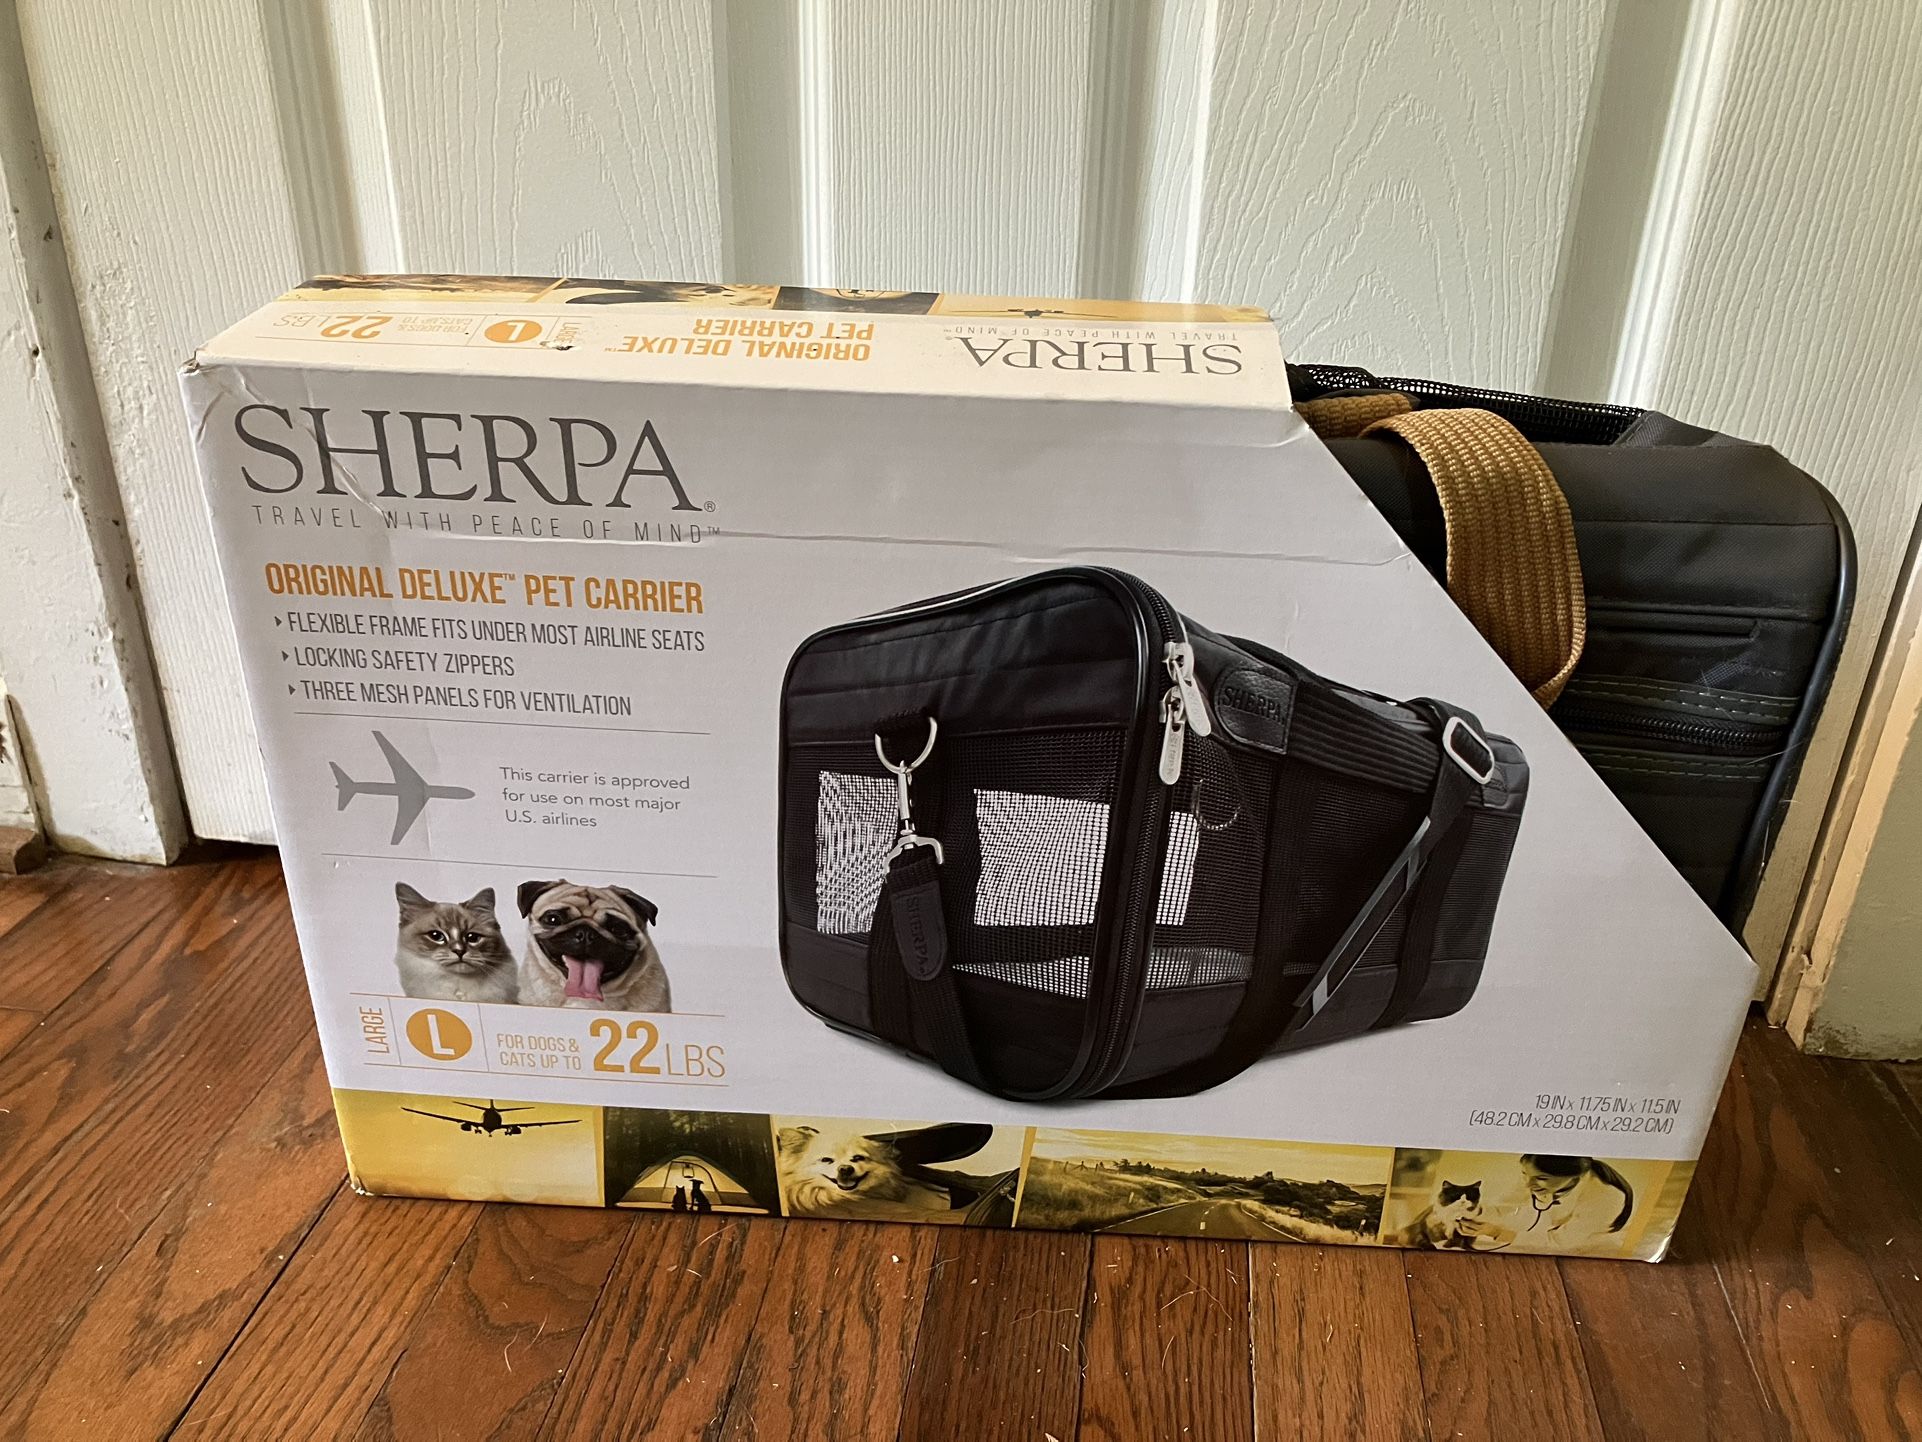 SHERPA Original Deluxe Pet Carrier (Large) (Unopened In Box) ($45 OBO)